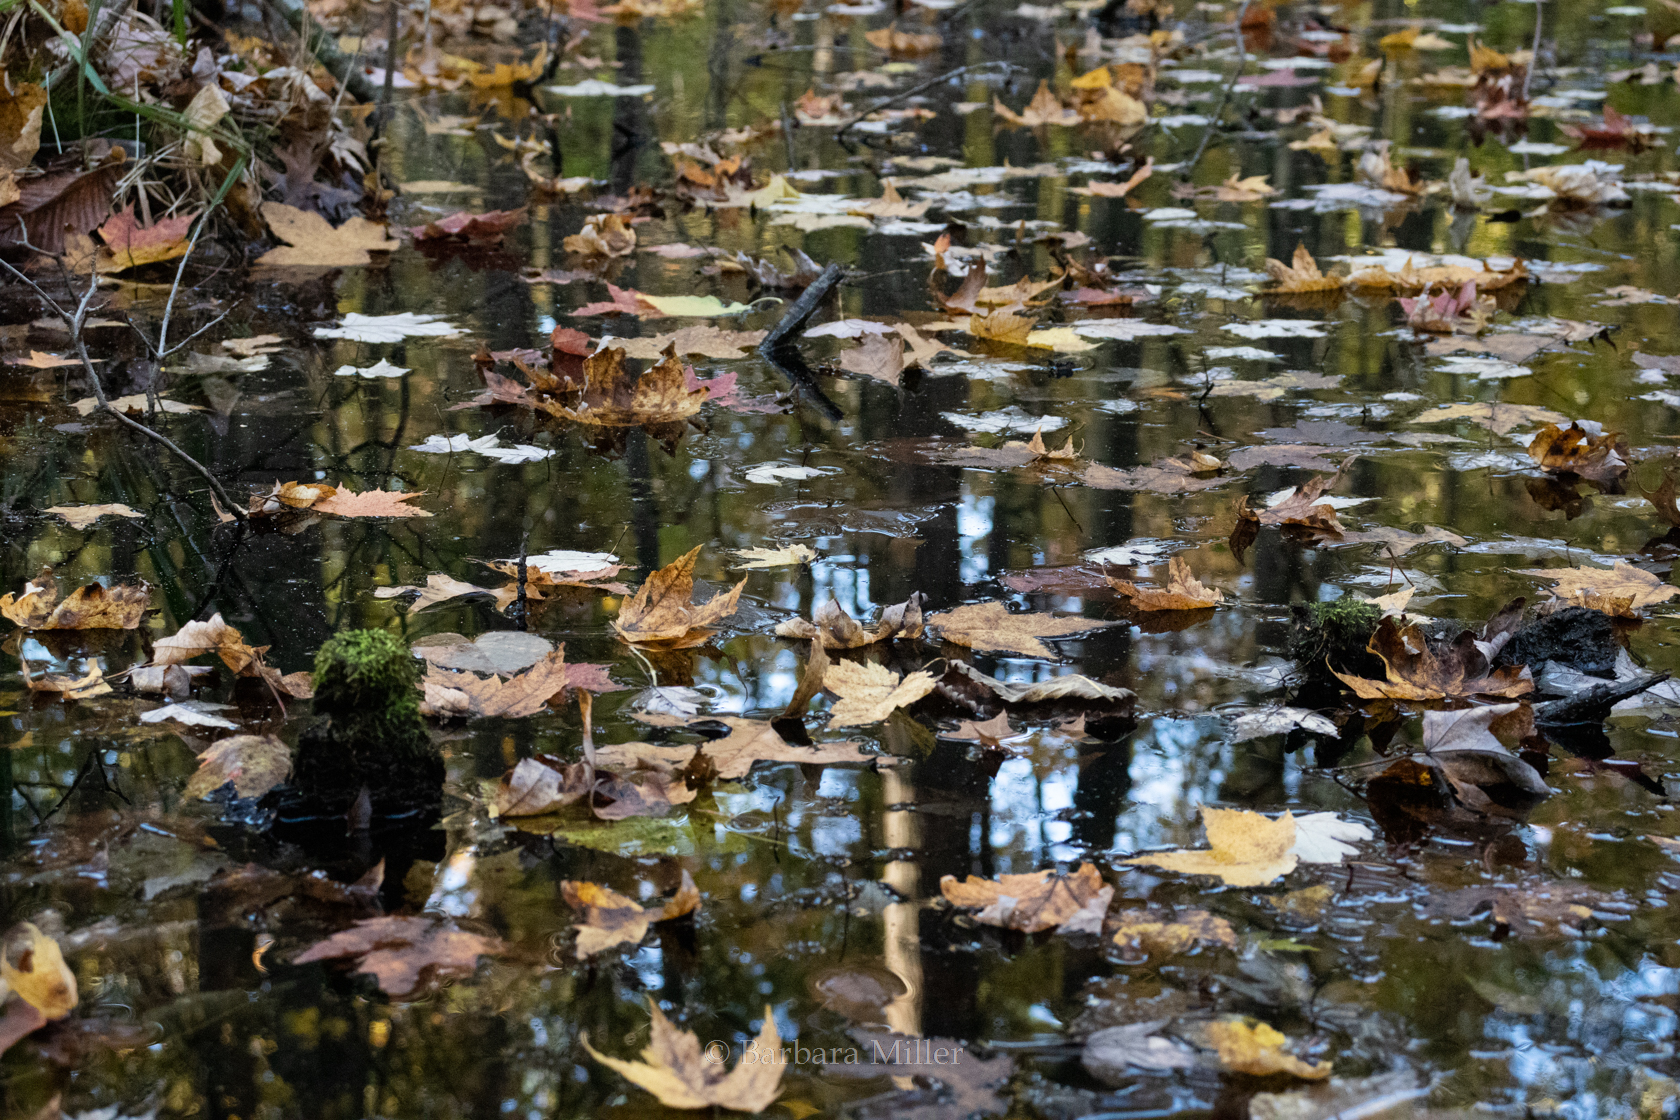 Leaves floating on water with trees showing in the reflection